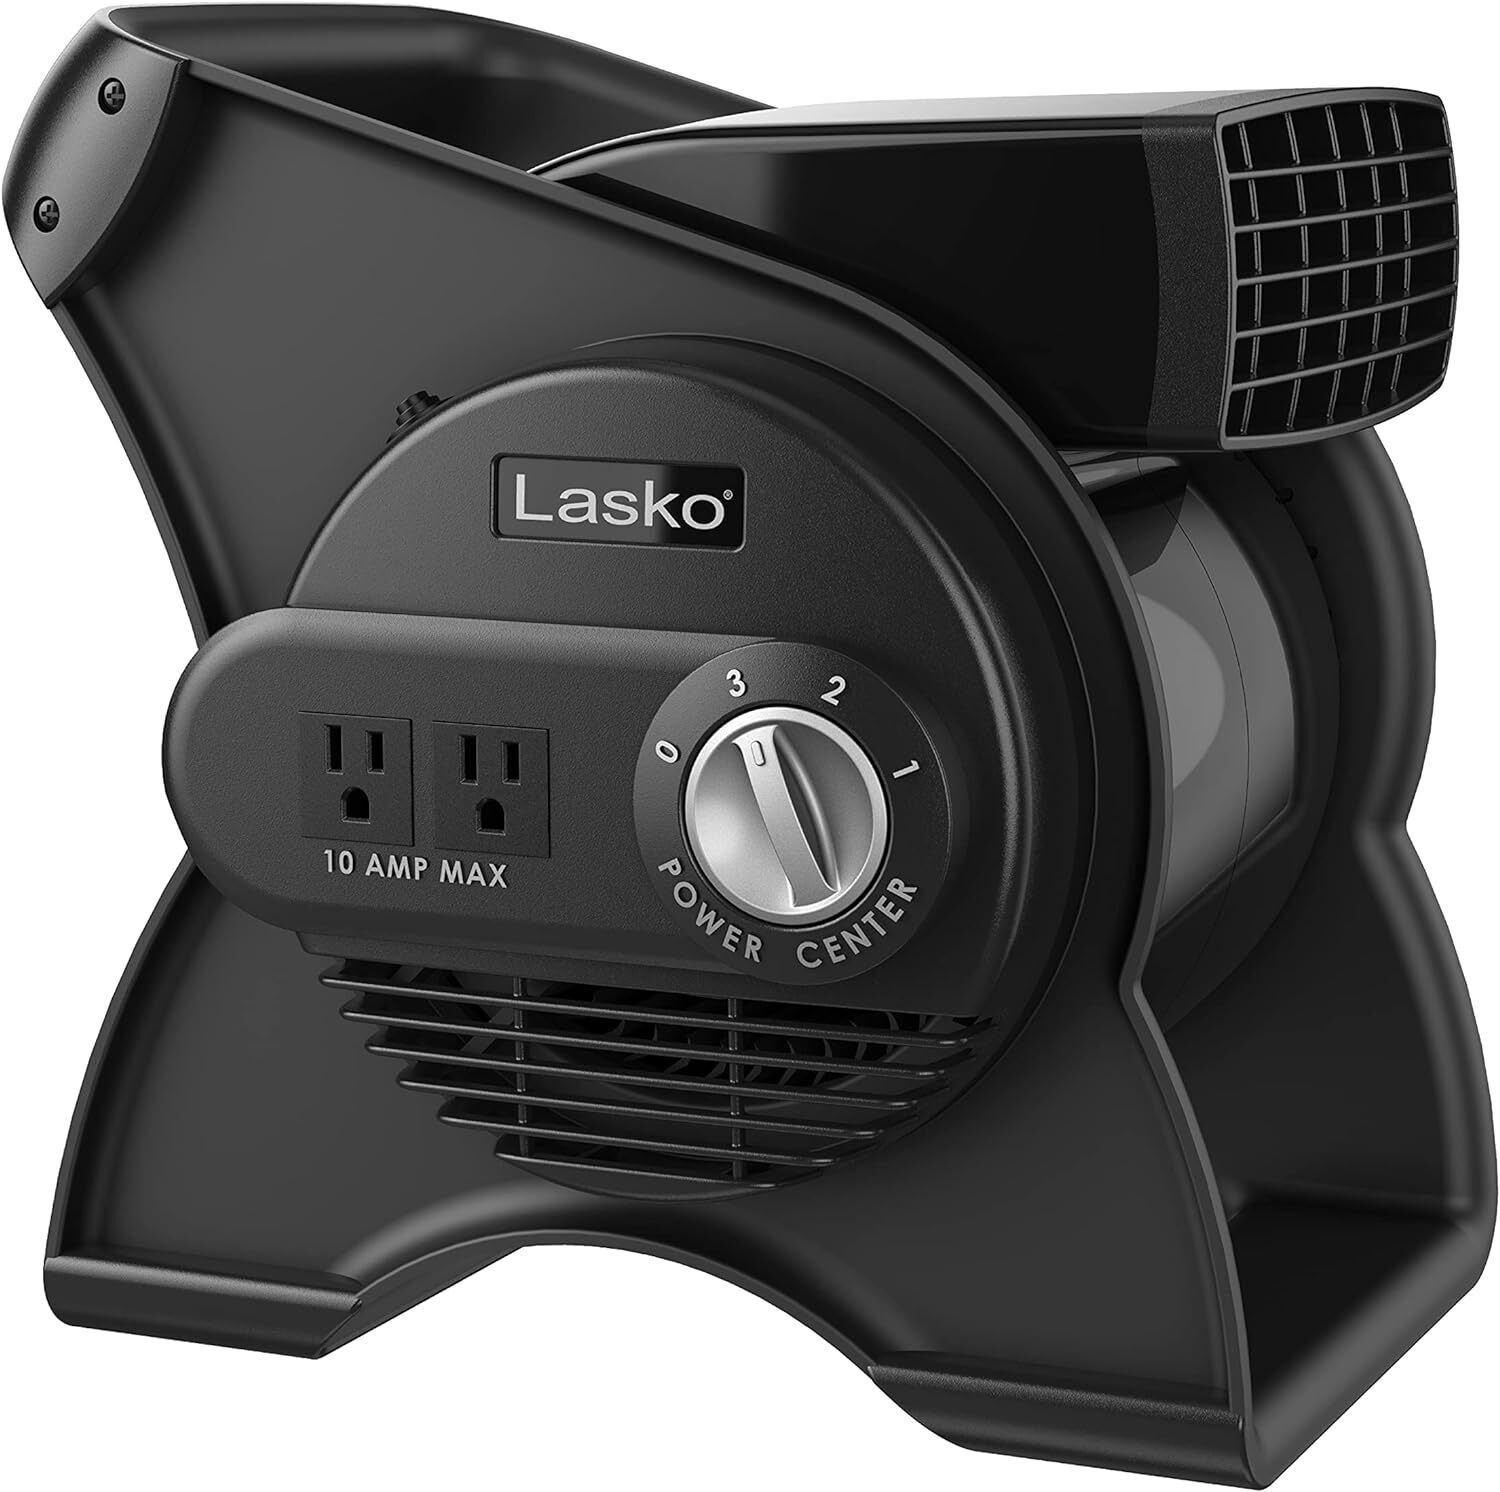 Lasko High Velocity Pivoting Utility Blower Fan, for Cooling, Ventilating